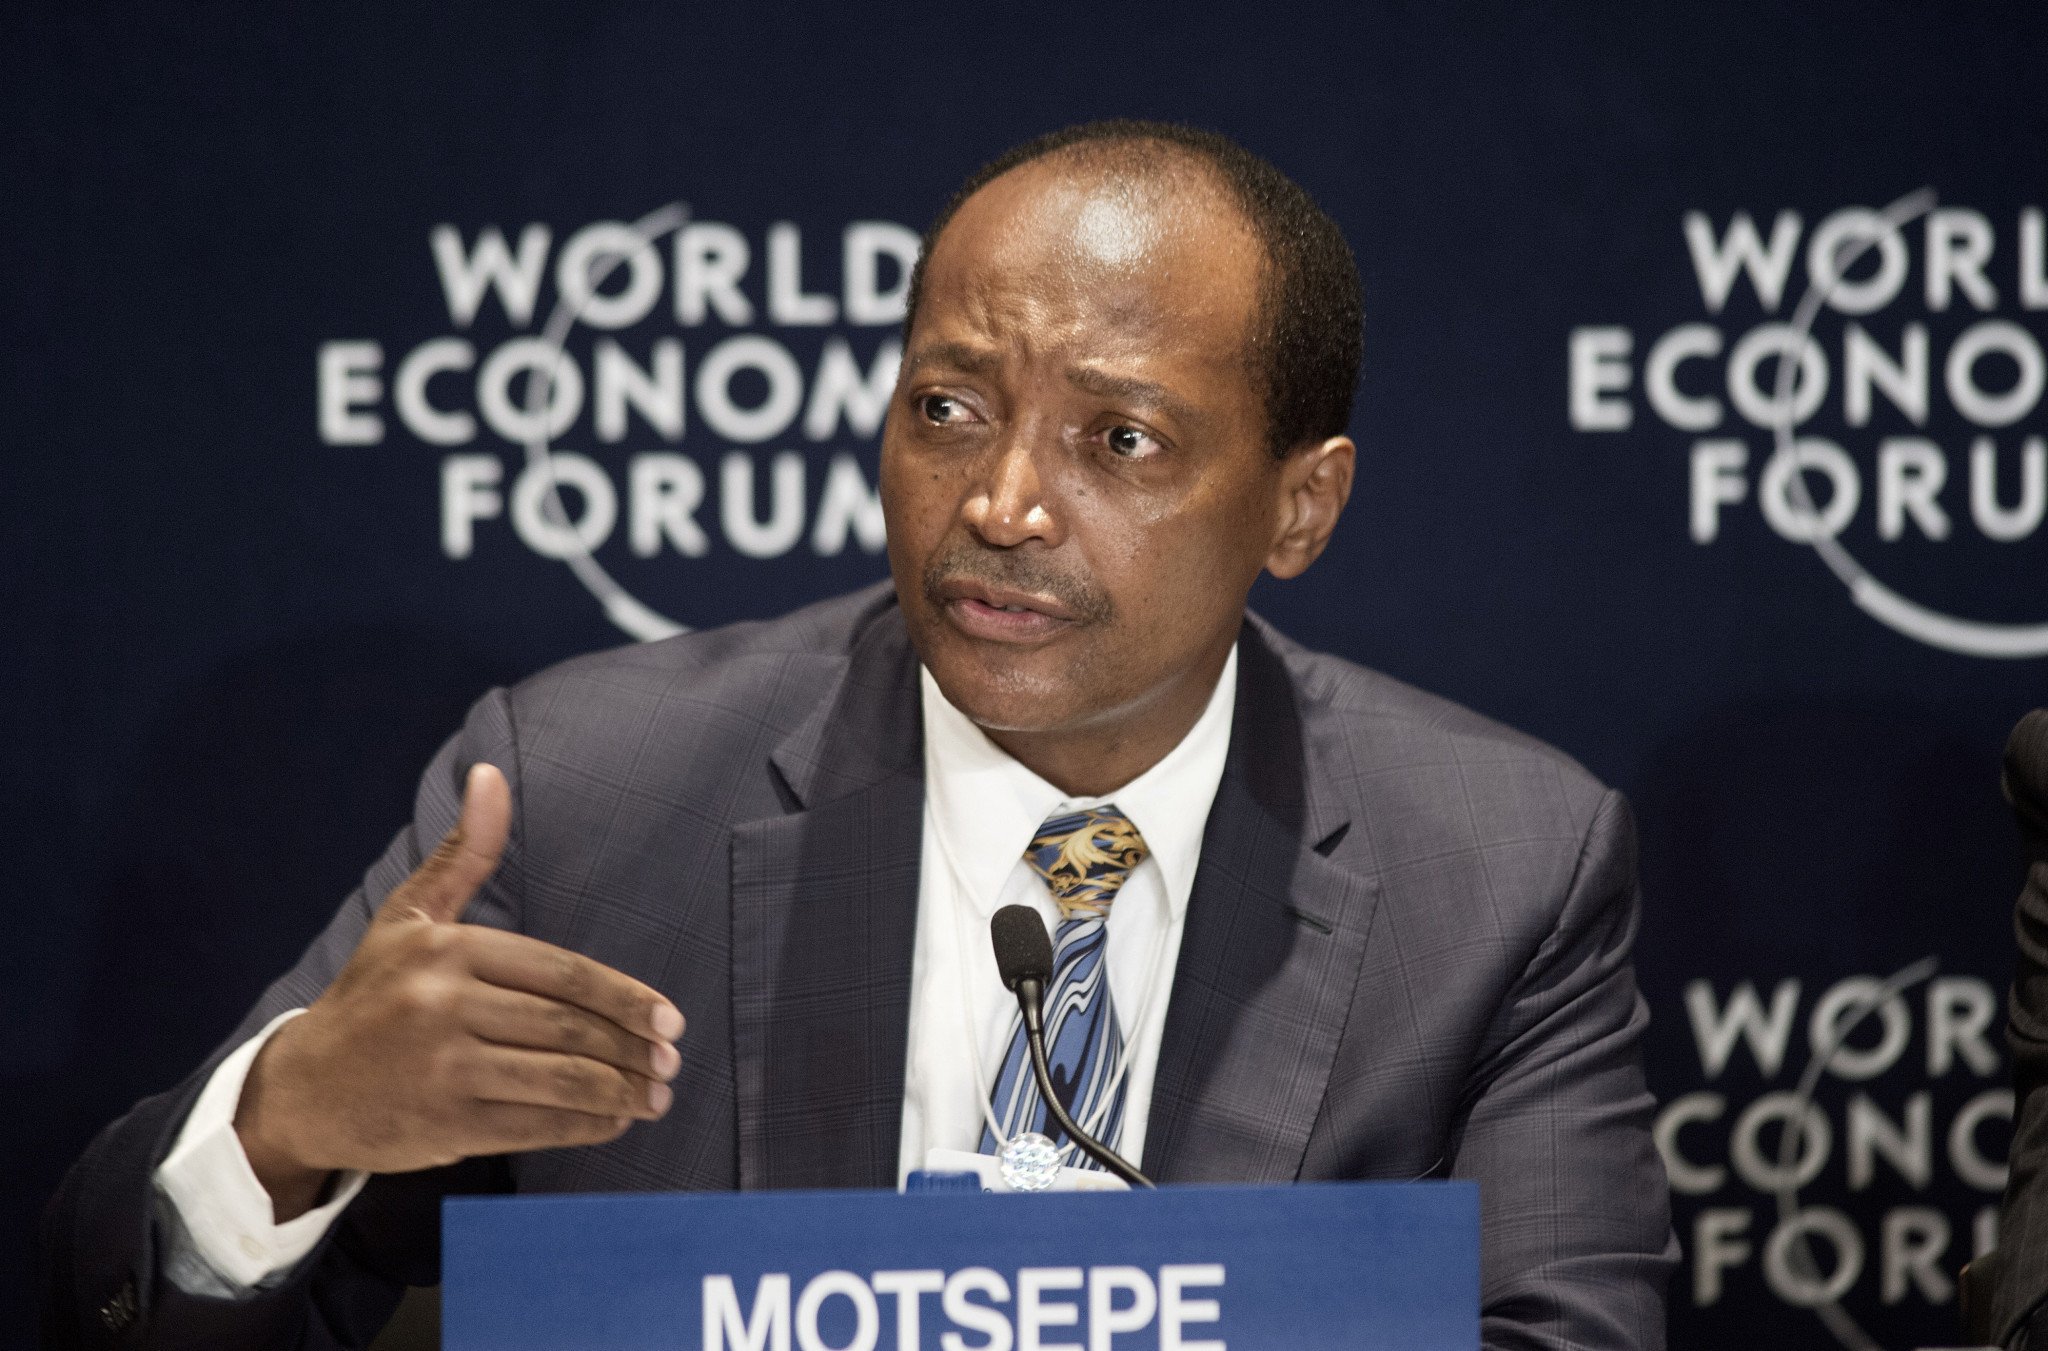 CAF President Patrice Motsepe confirmed that the Africa Cup of Nations is set to begin on January 9 ©Getty Images